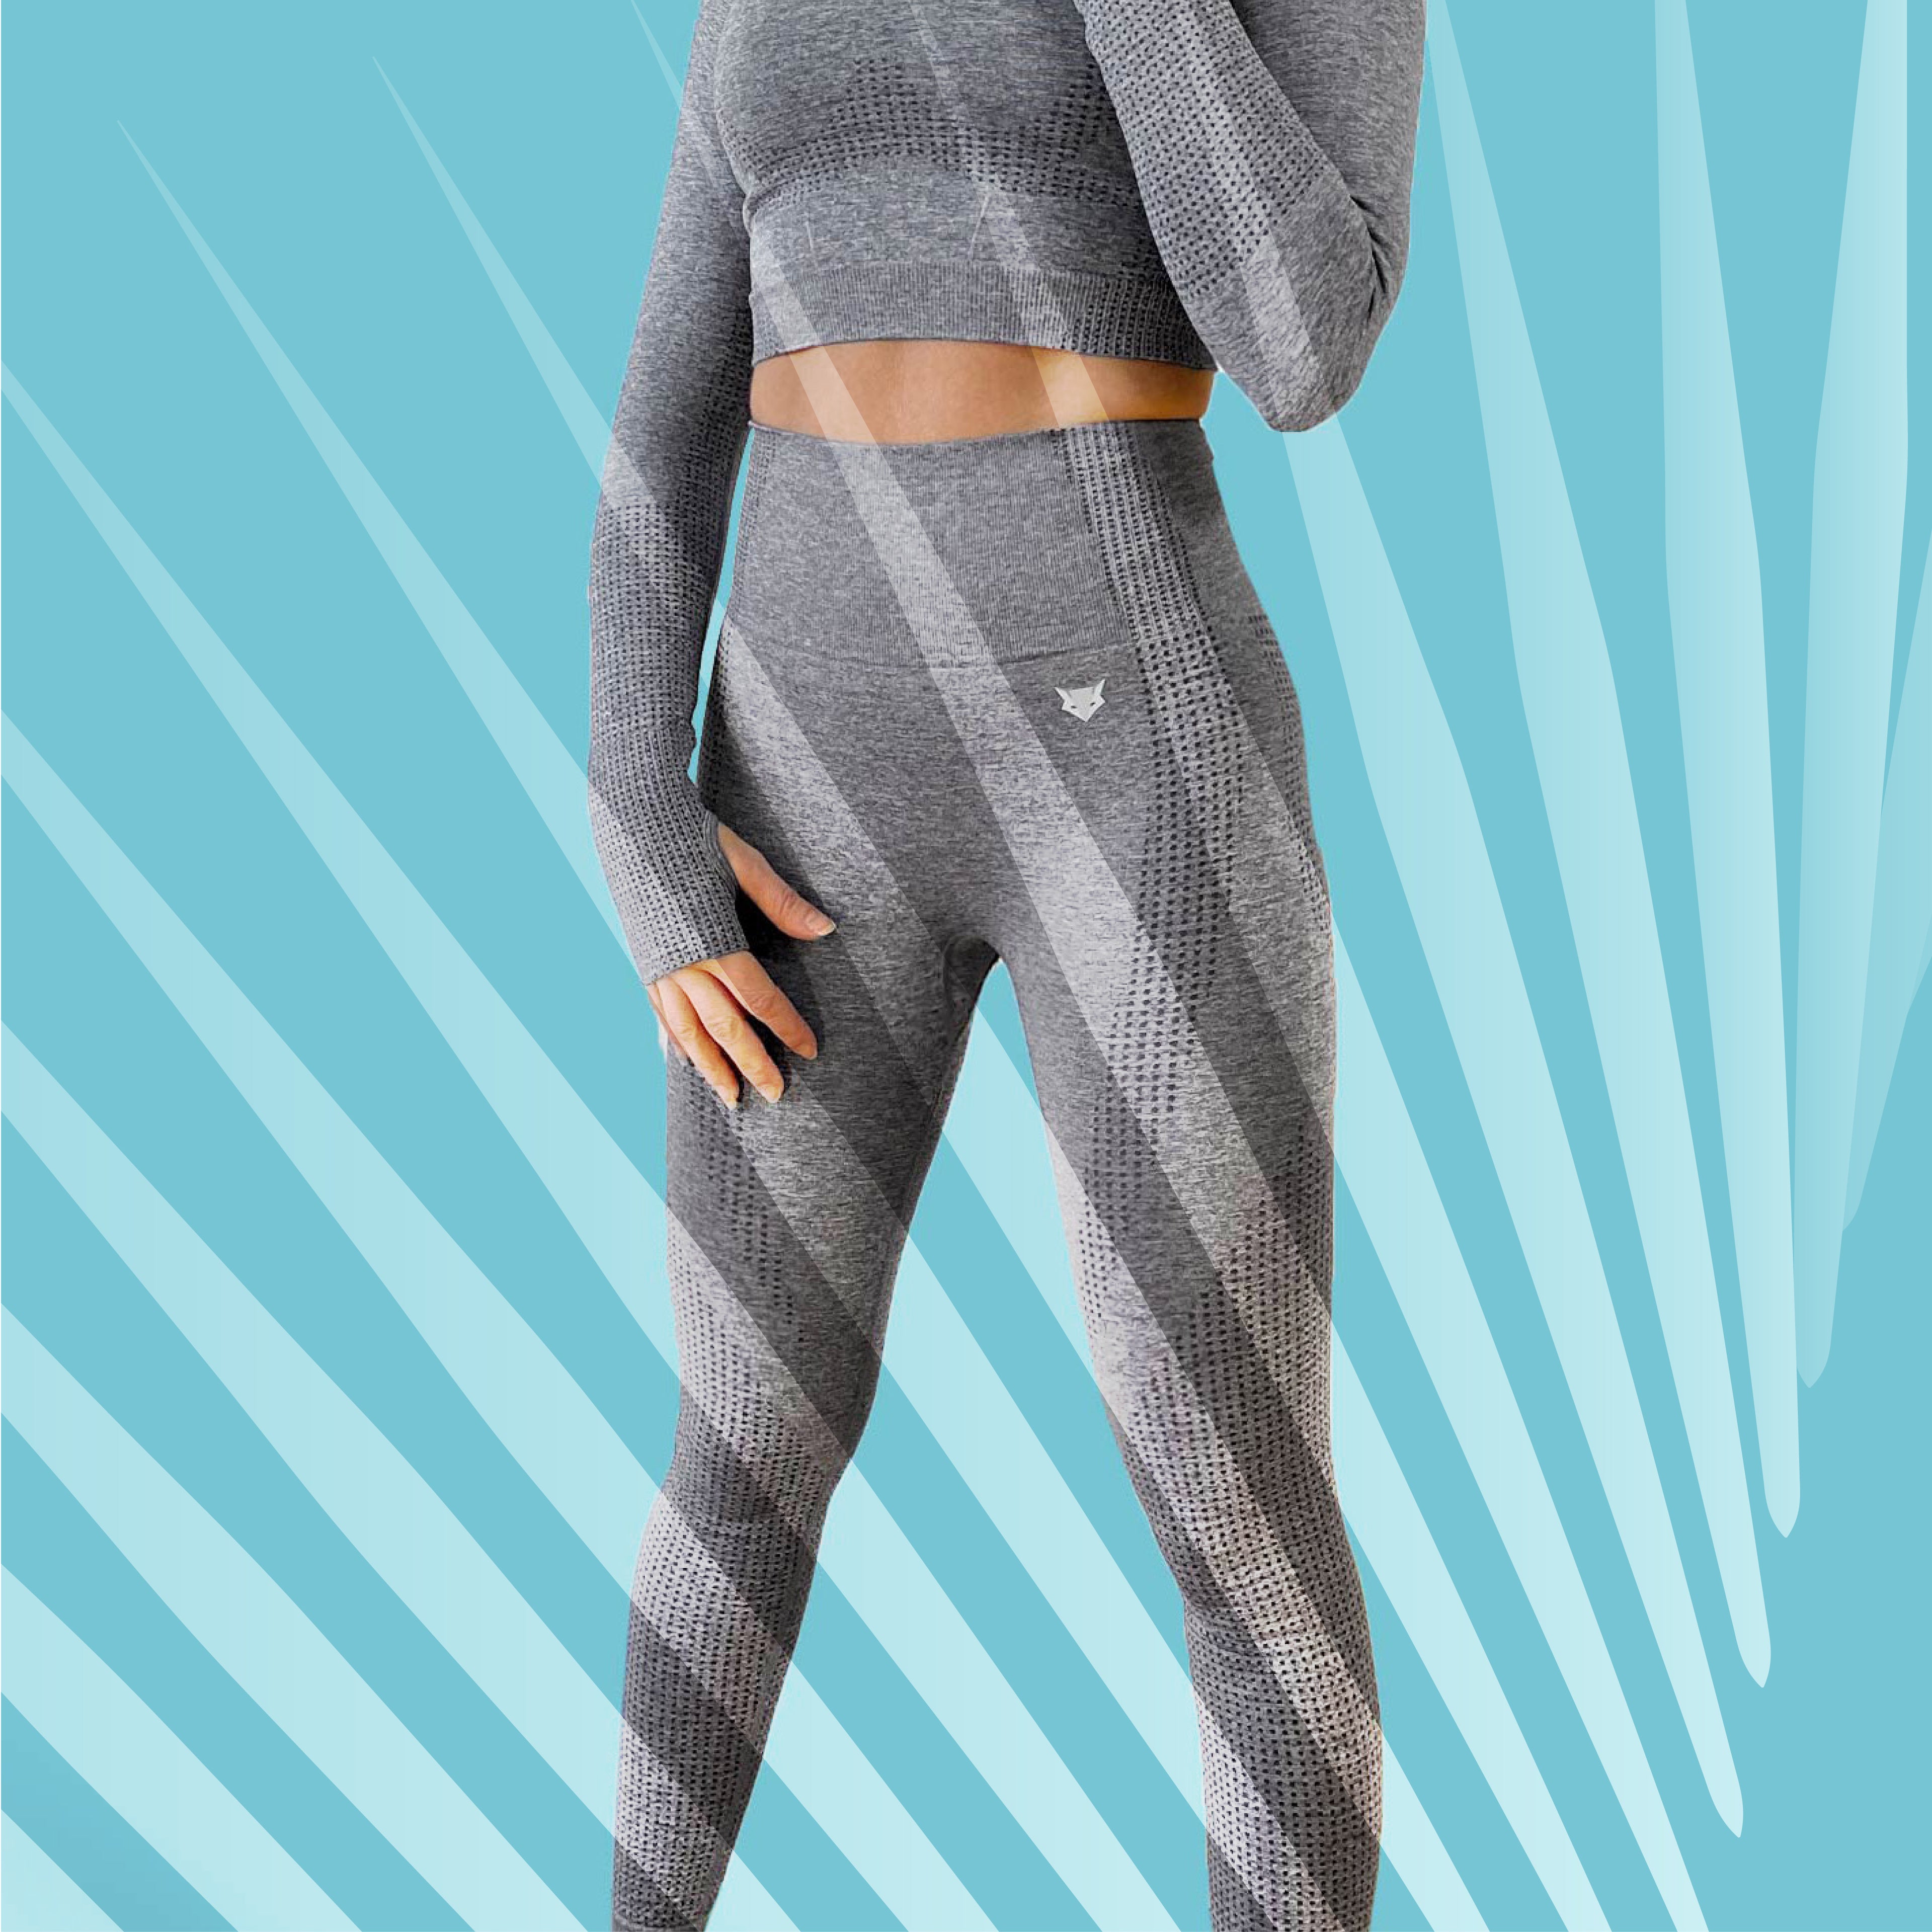 Elite Seamless 3 pieces set - Leggings and Long Sleeve Crop Top in Grey. The supportive fabric and seamless silhouettes not only help to perform your best during a workout but even to look stunning in your outfit outside the gym.